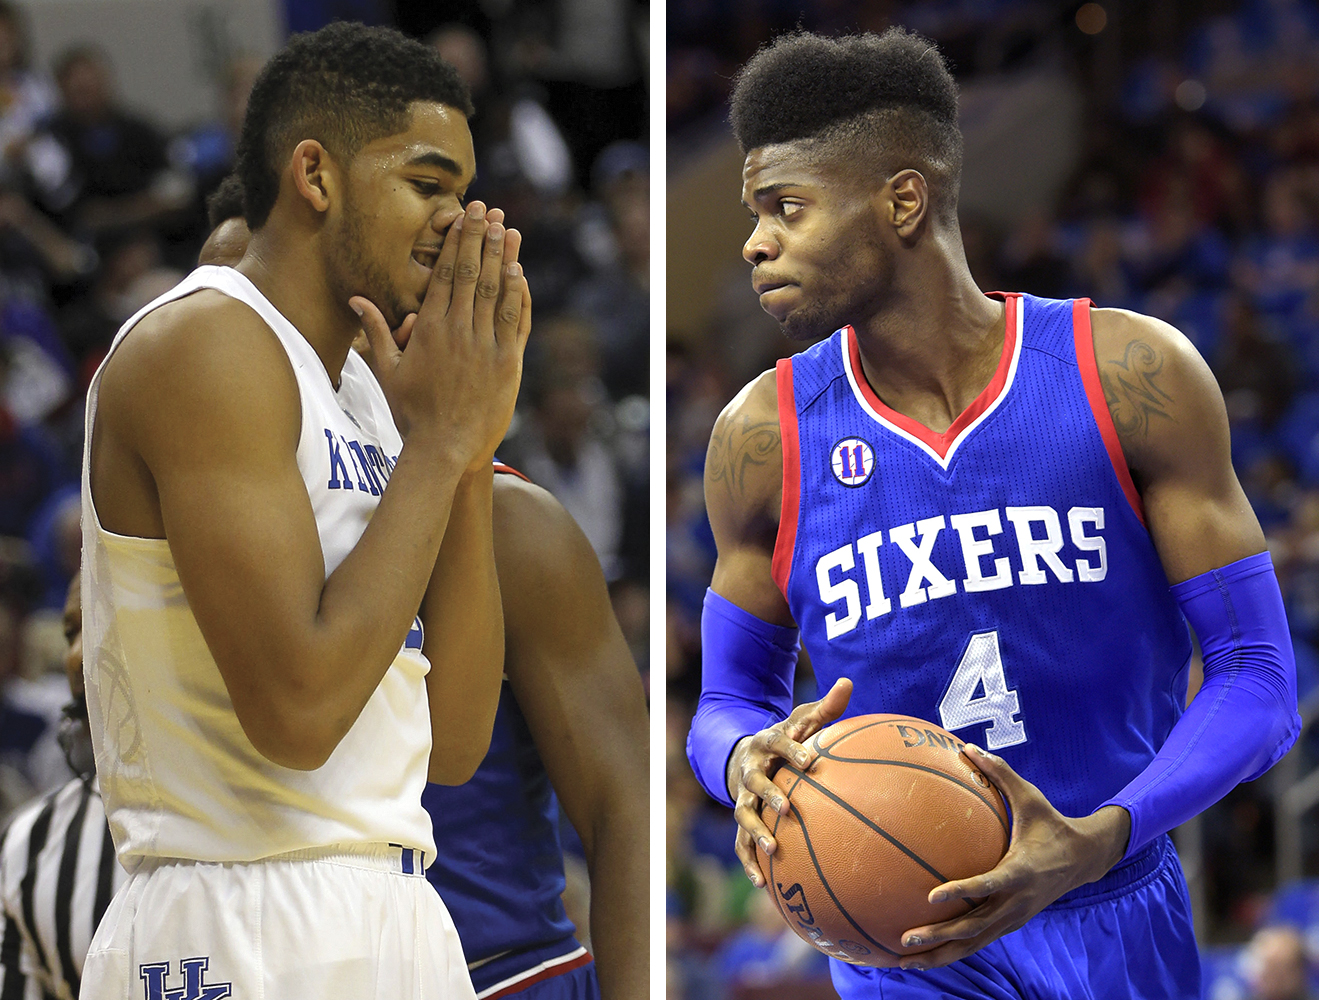 Left: Kentucky freshman Karl-Anthony Towns. Right: 76ers rookie Nerlens Noel. (USA TODAY Sports photos)